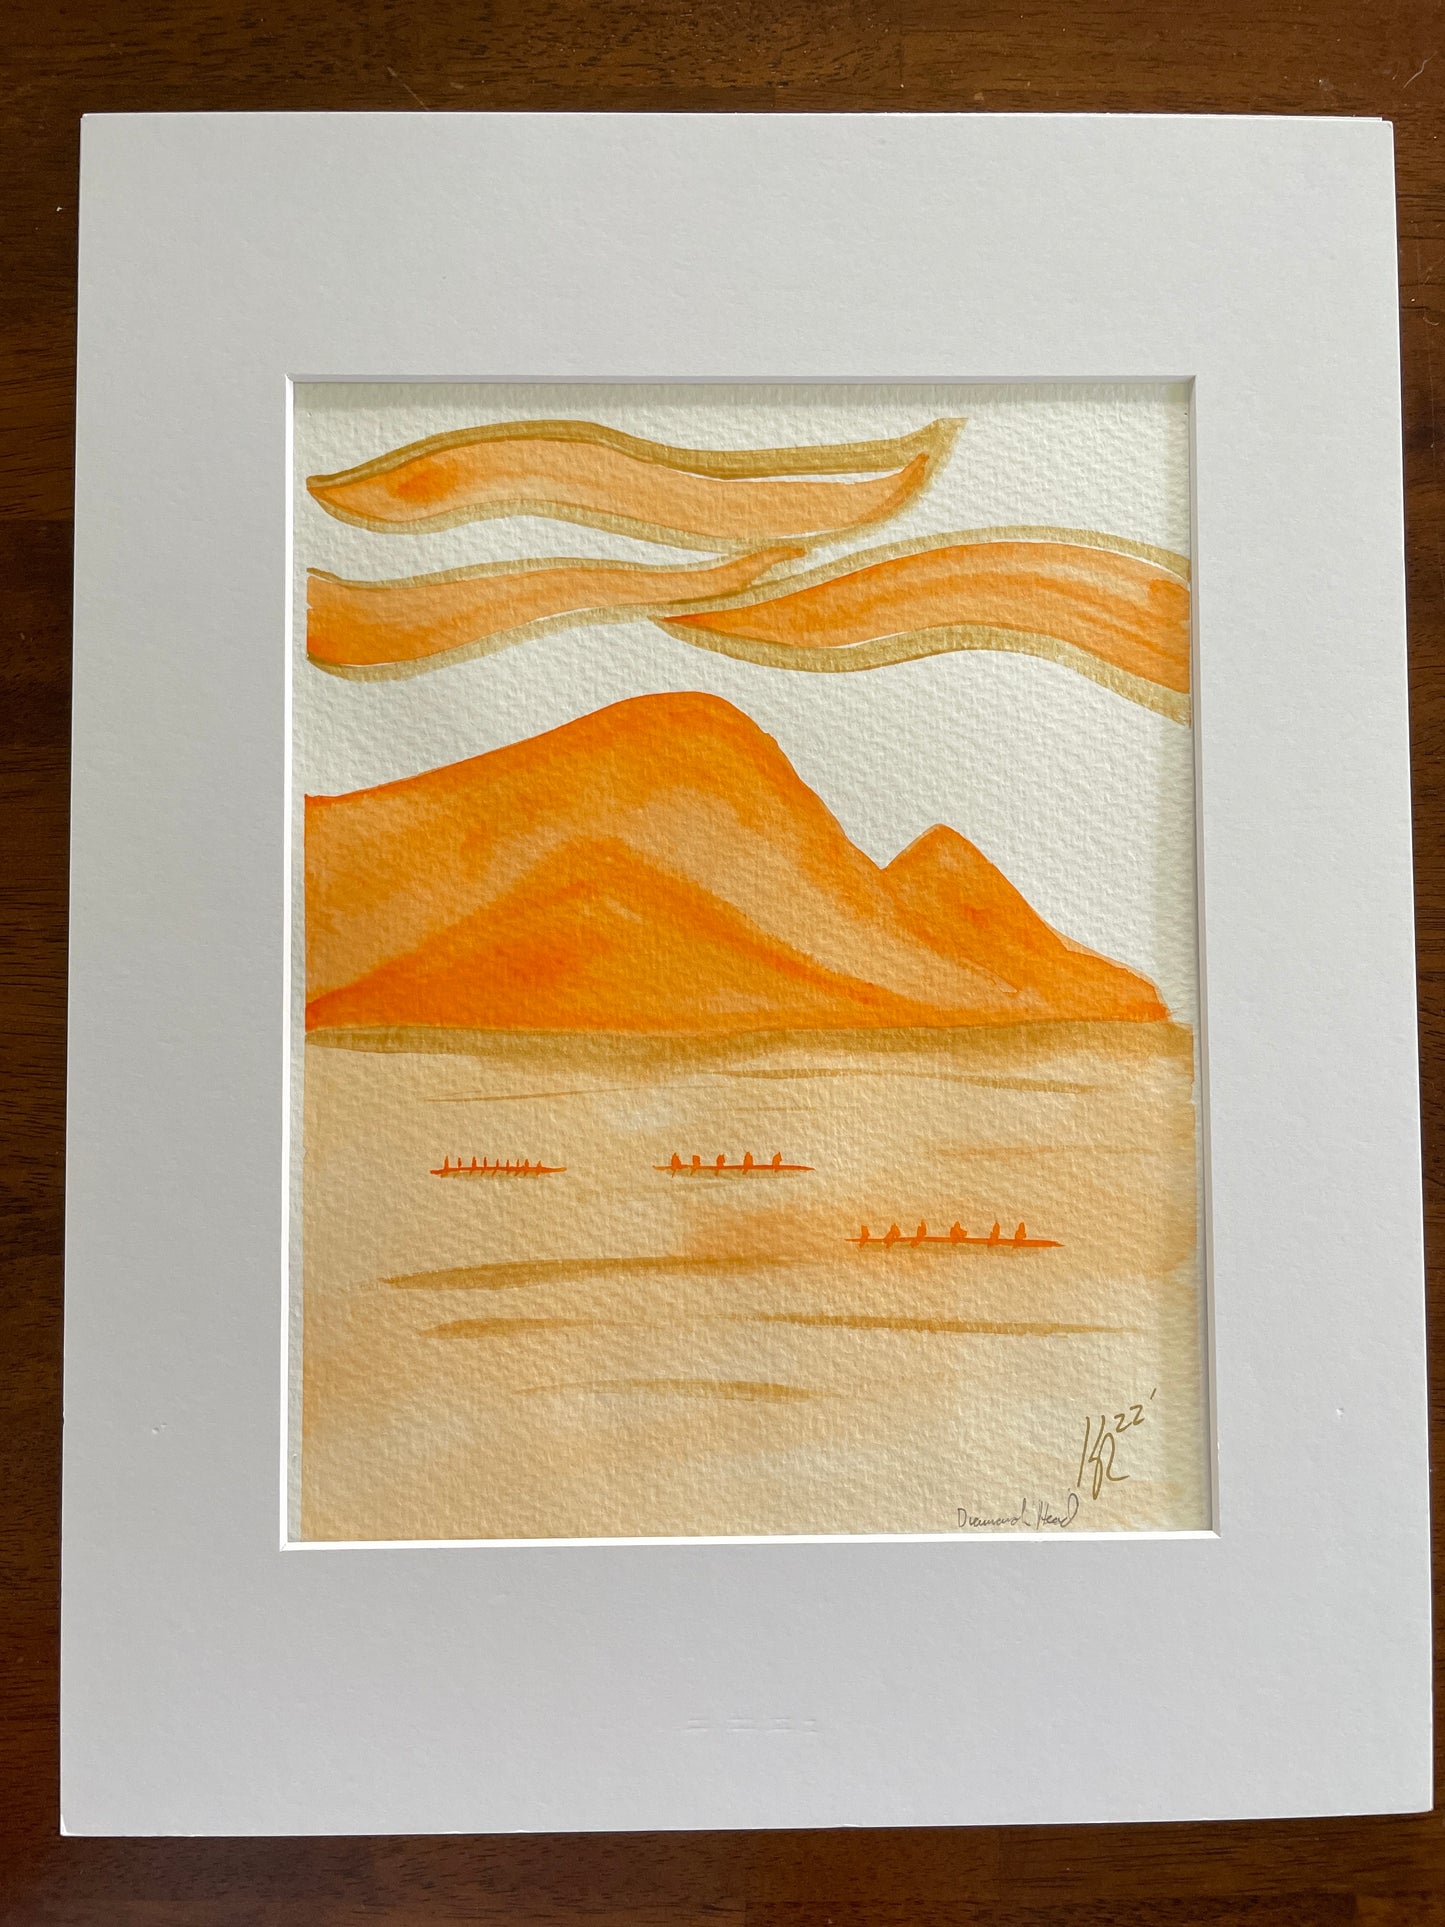 Orange and gold Diamond Head and Outriggers ... 11x14